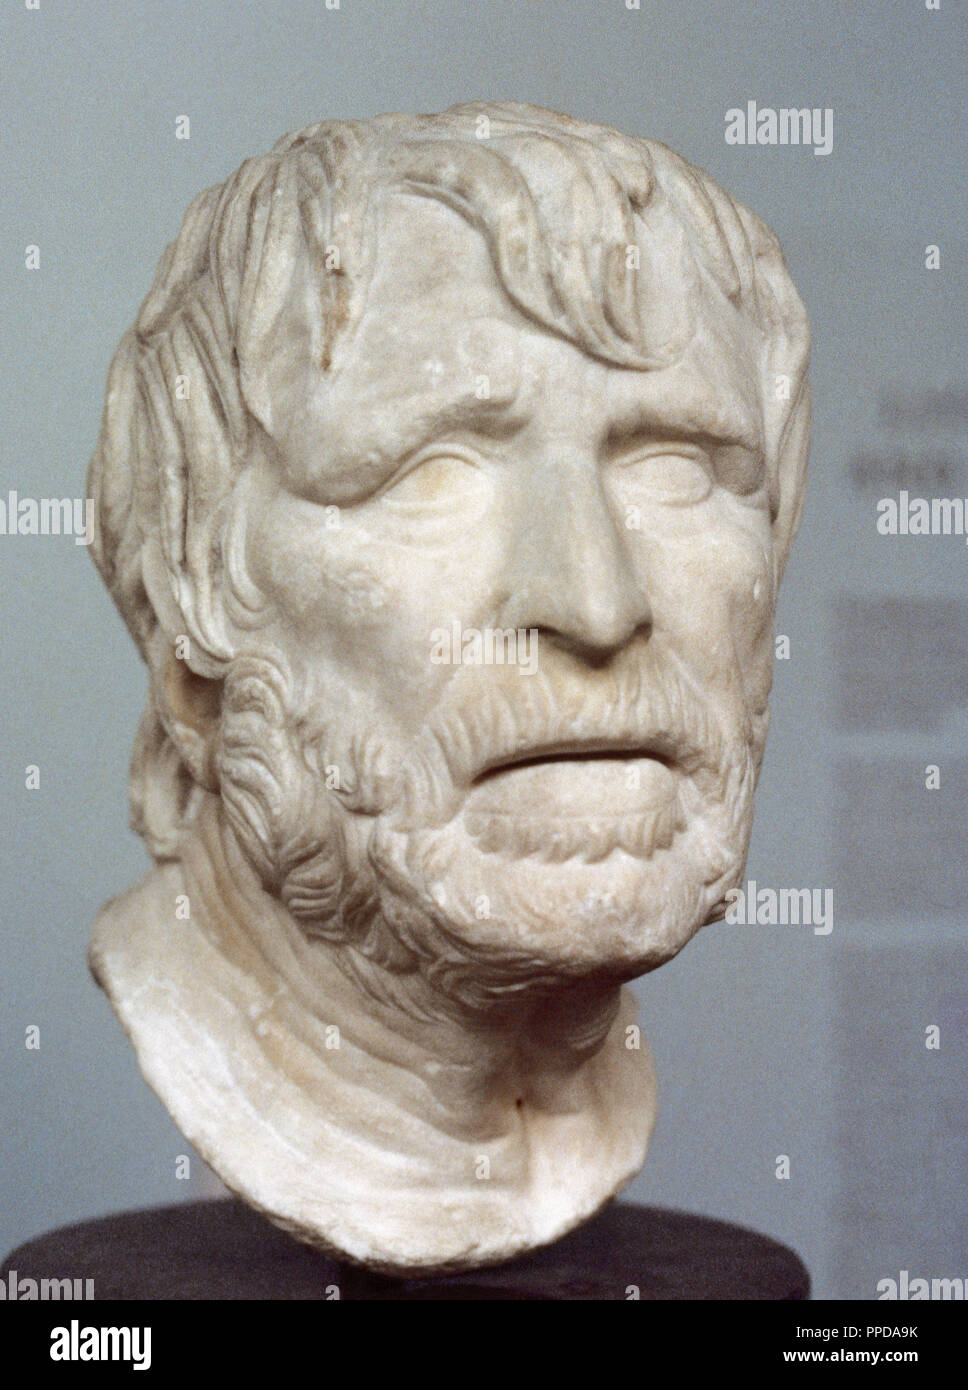 Pseudo-Seneca. Bust identified with the Roman philosopher Seneca during lot of time. It may represent the Greek poet Hesiod (ca. 700 BC). Roman copy of a lost Hellenistic sculpture. Roman bust. British Museum. London, England. Stock Photo